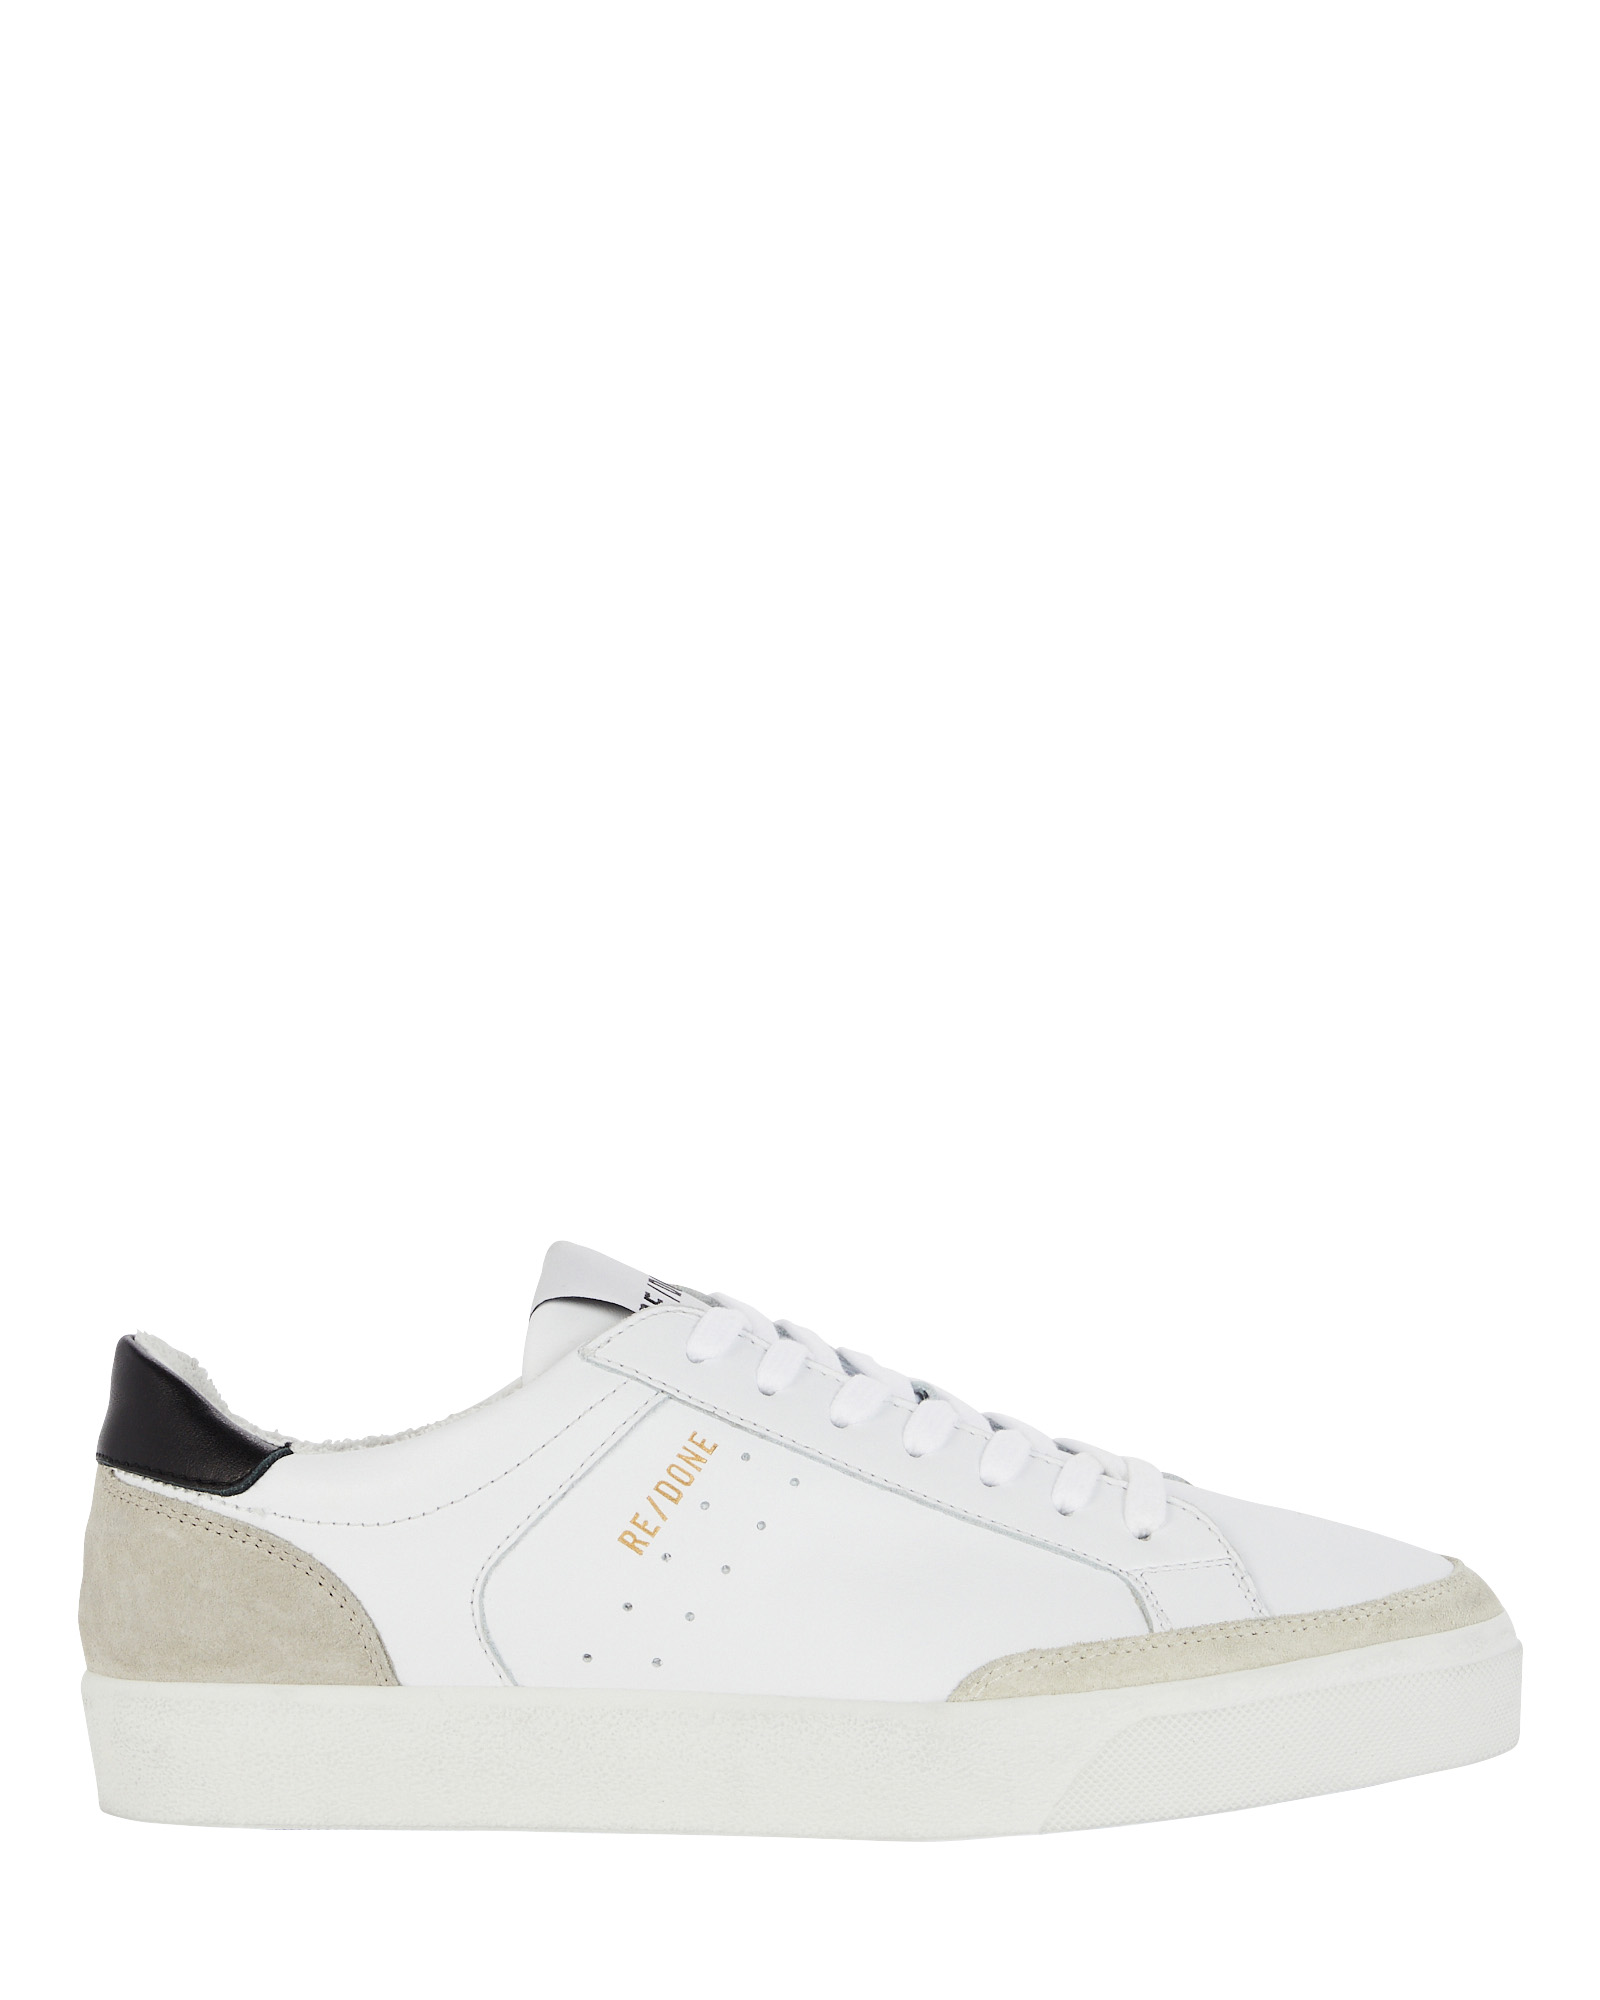 RE/DONE 90s Leather Skate Sneakers | INTERMIX®